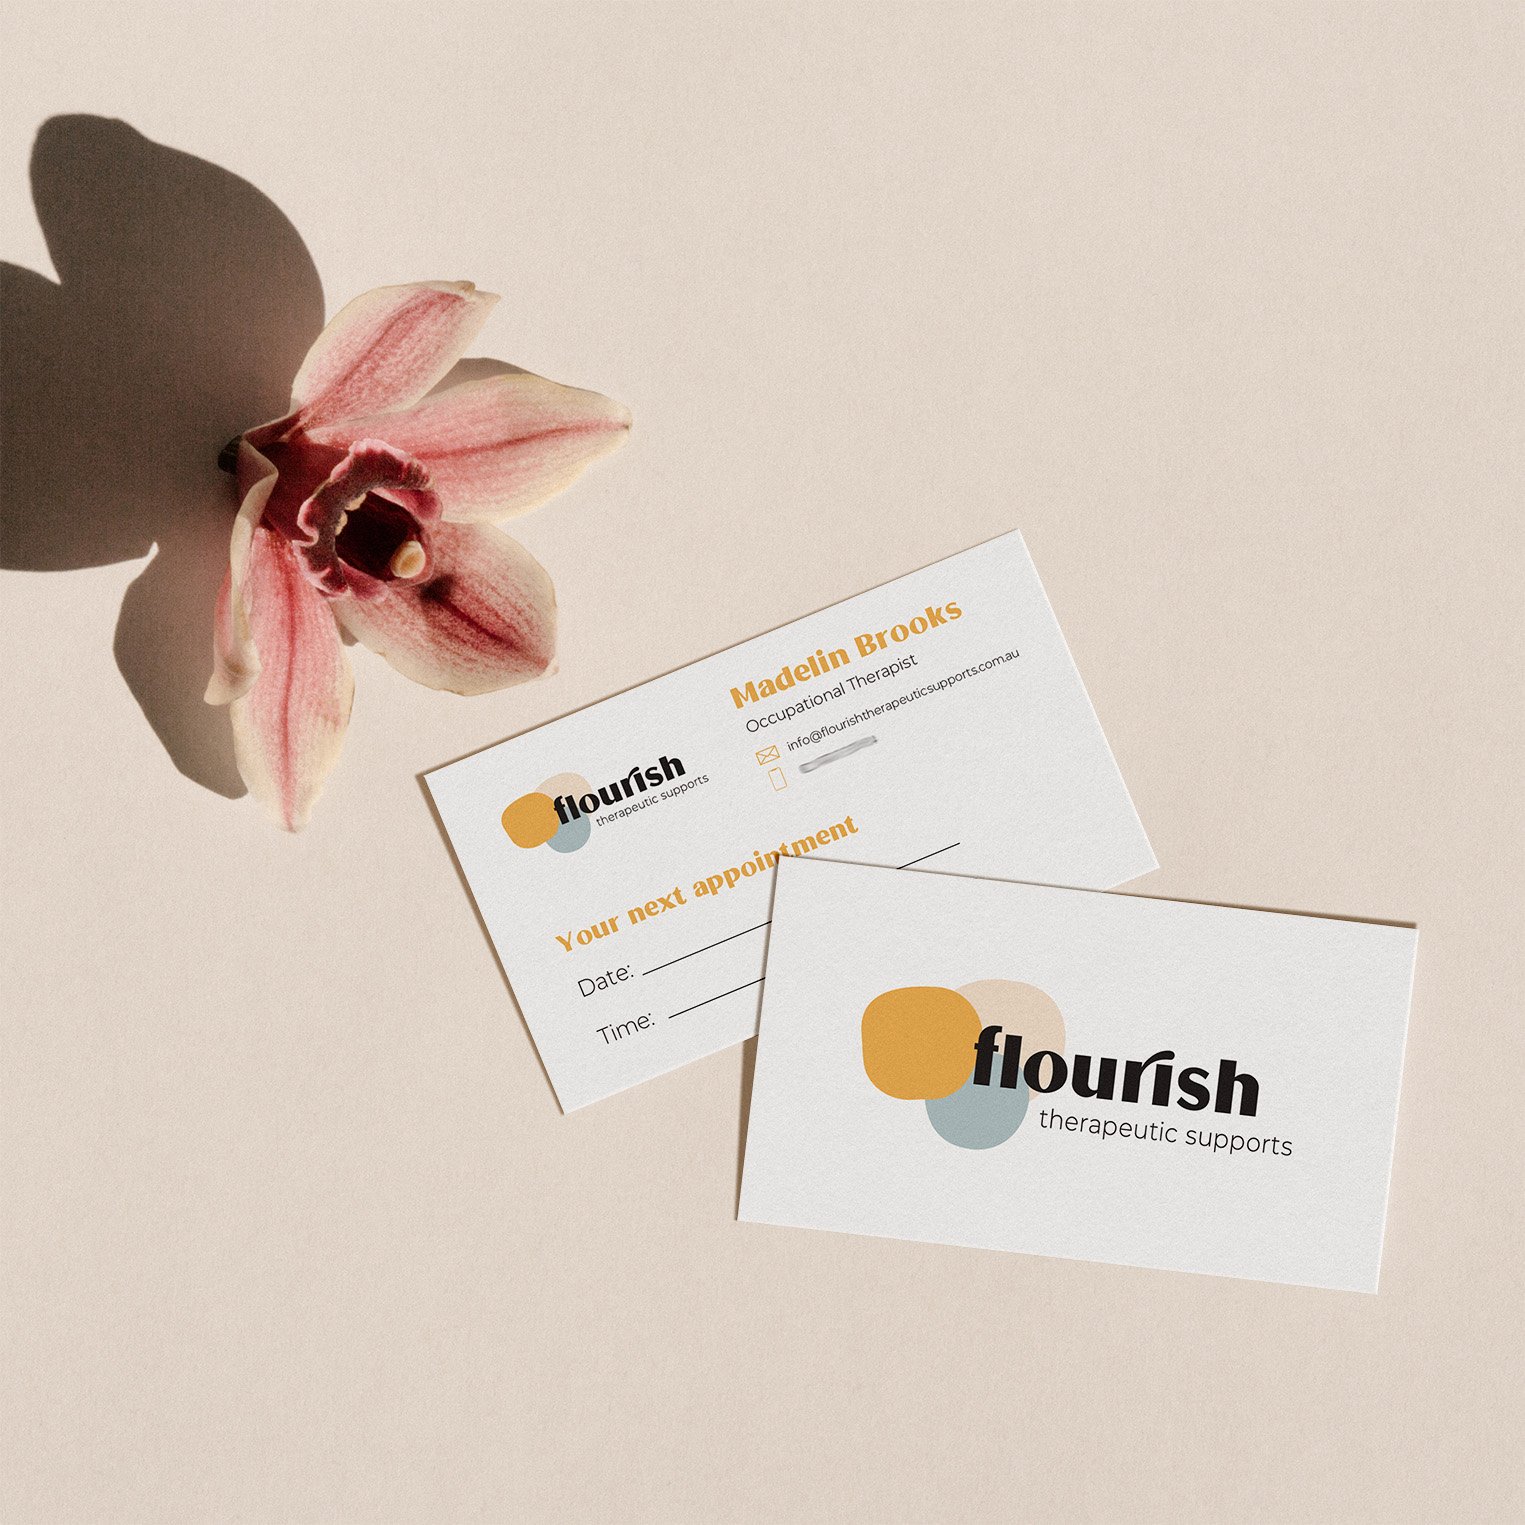 Flourish Therapuetic Supports Business Cards.jpg